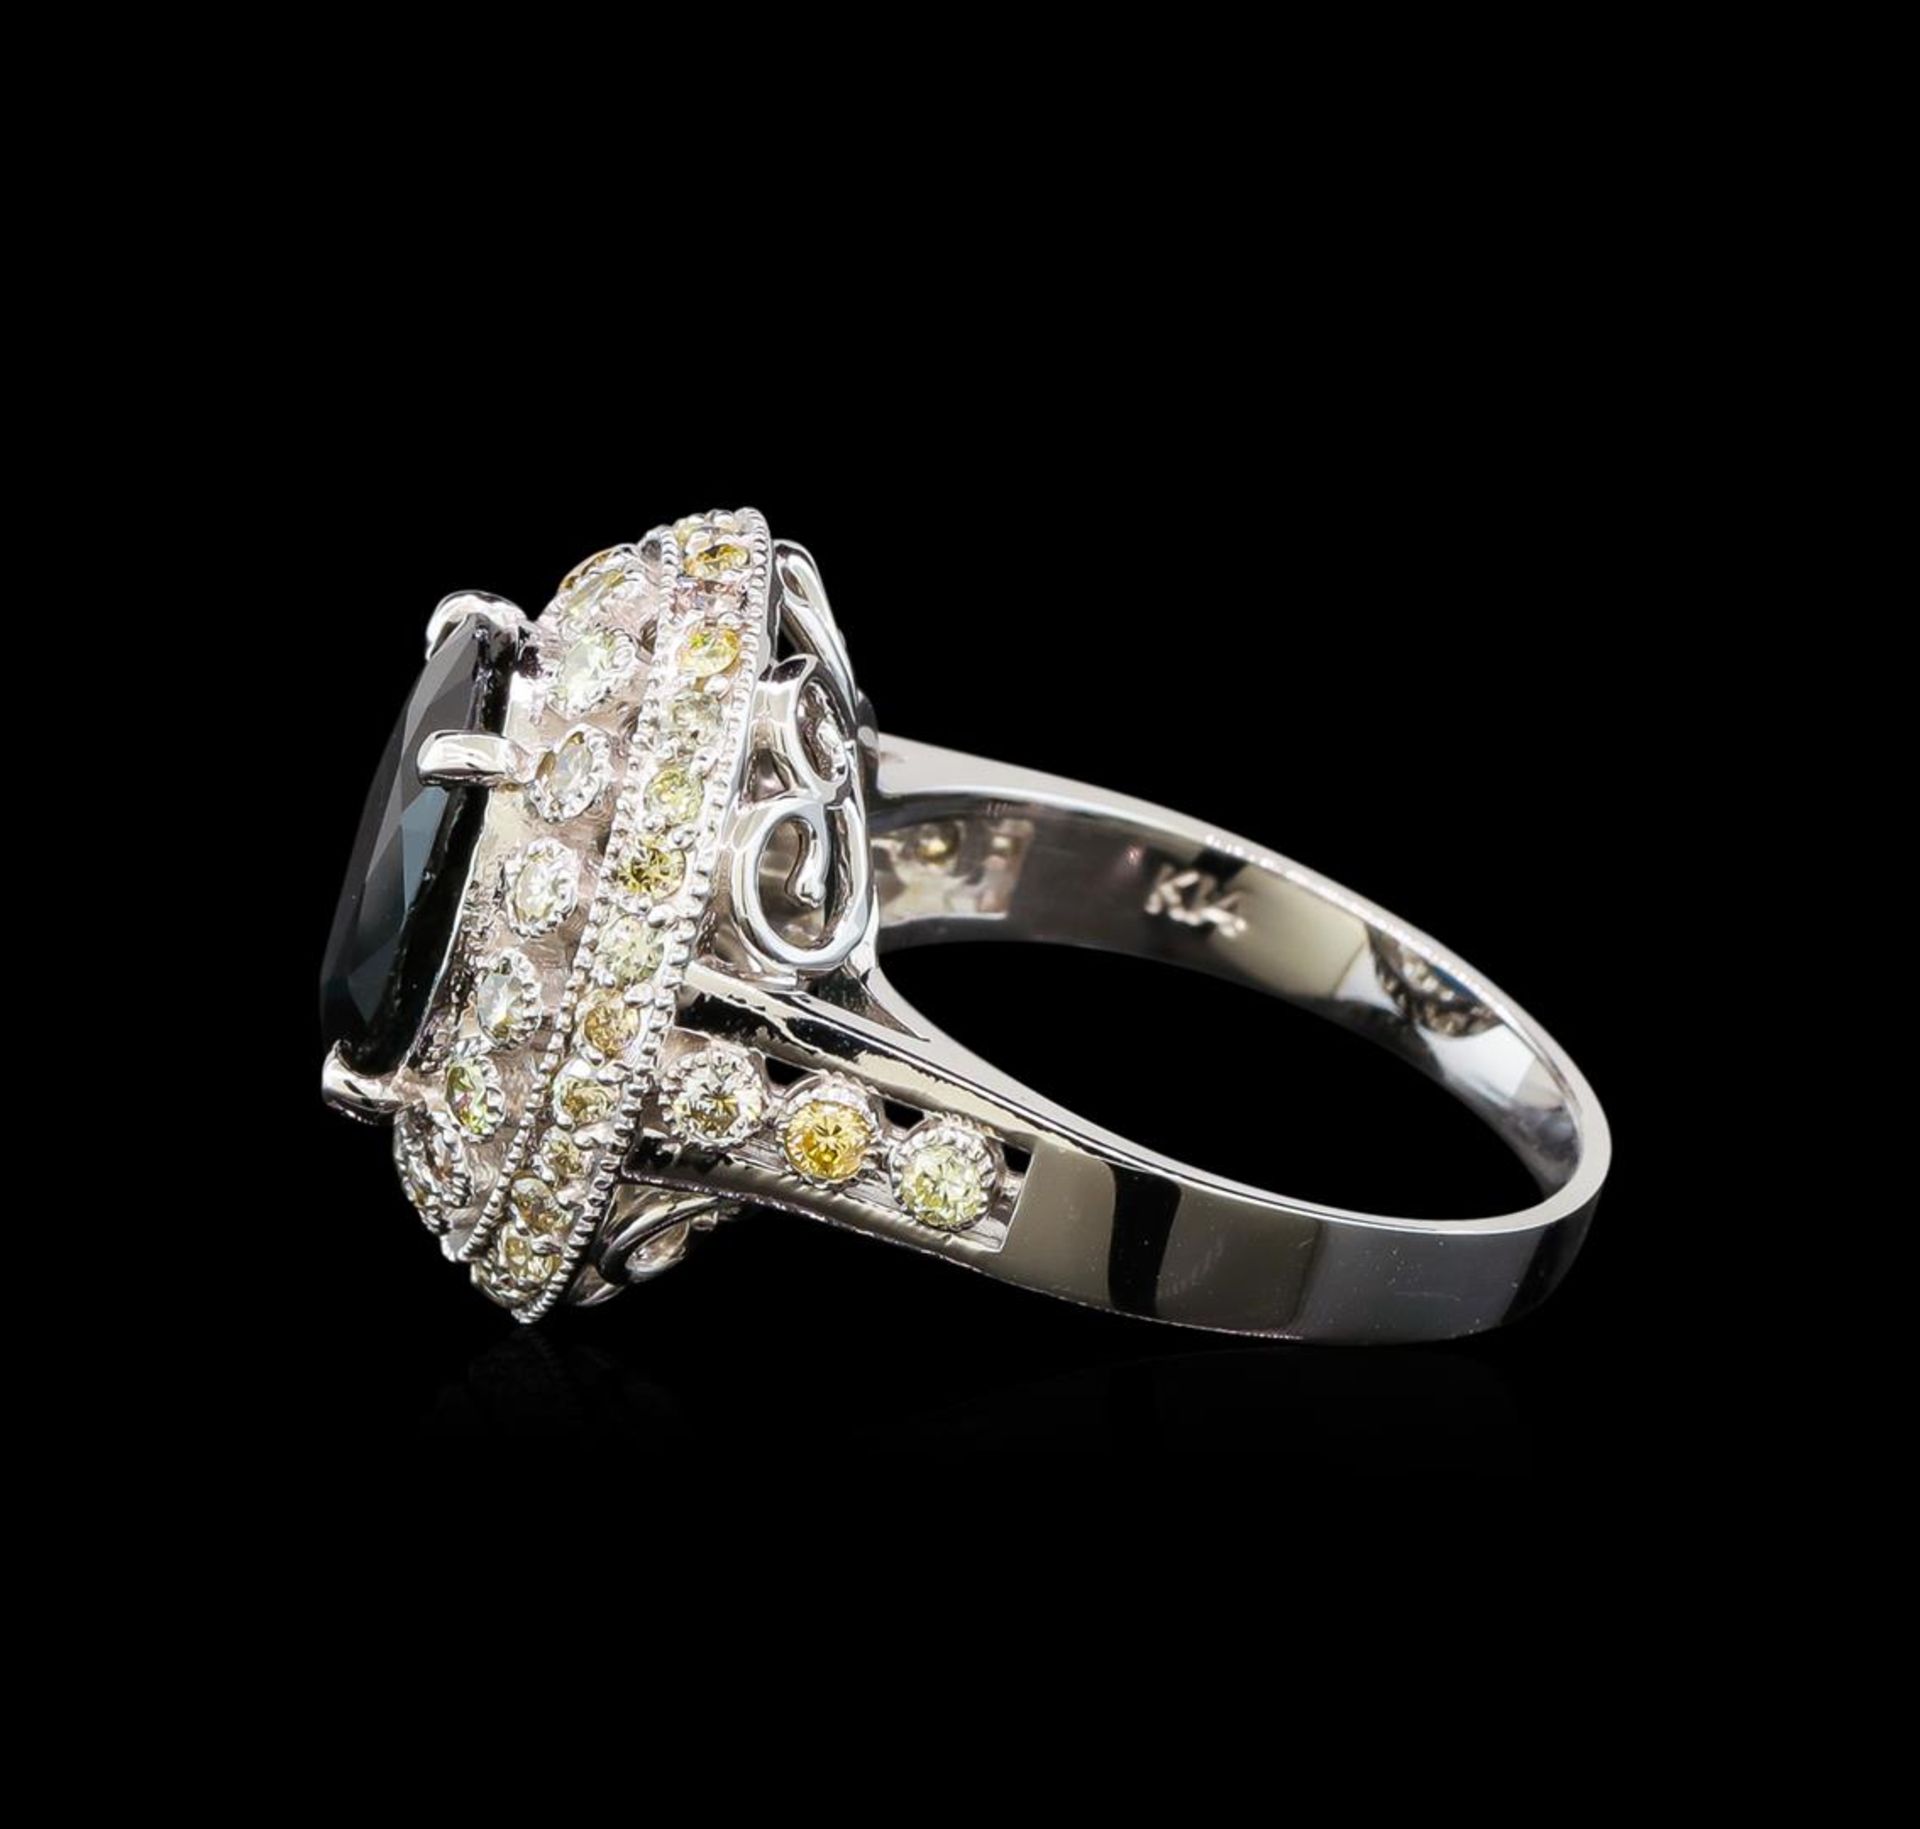 14KT White Gold 3.57 ctw Sapphire and Diamond Ring - Image 3 of 5